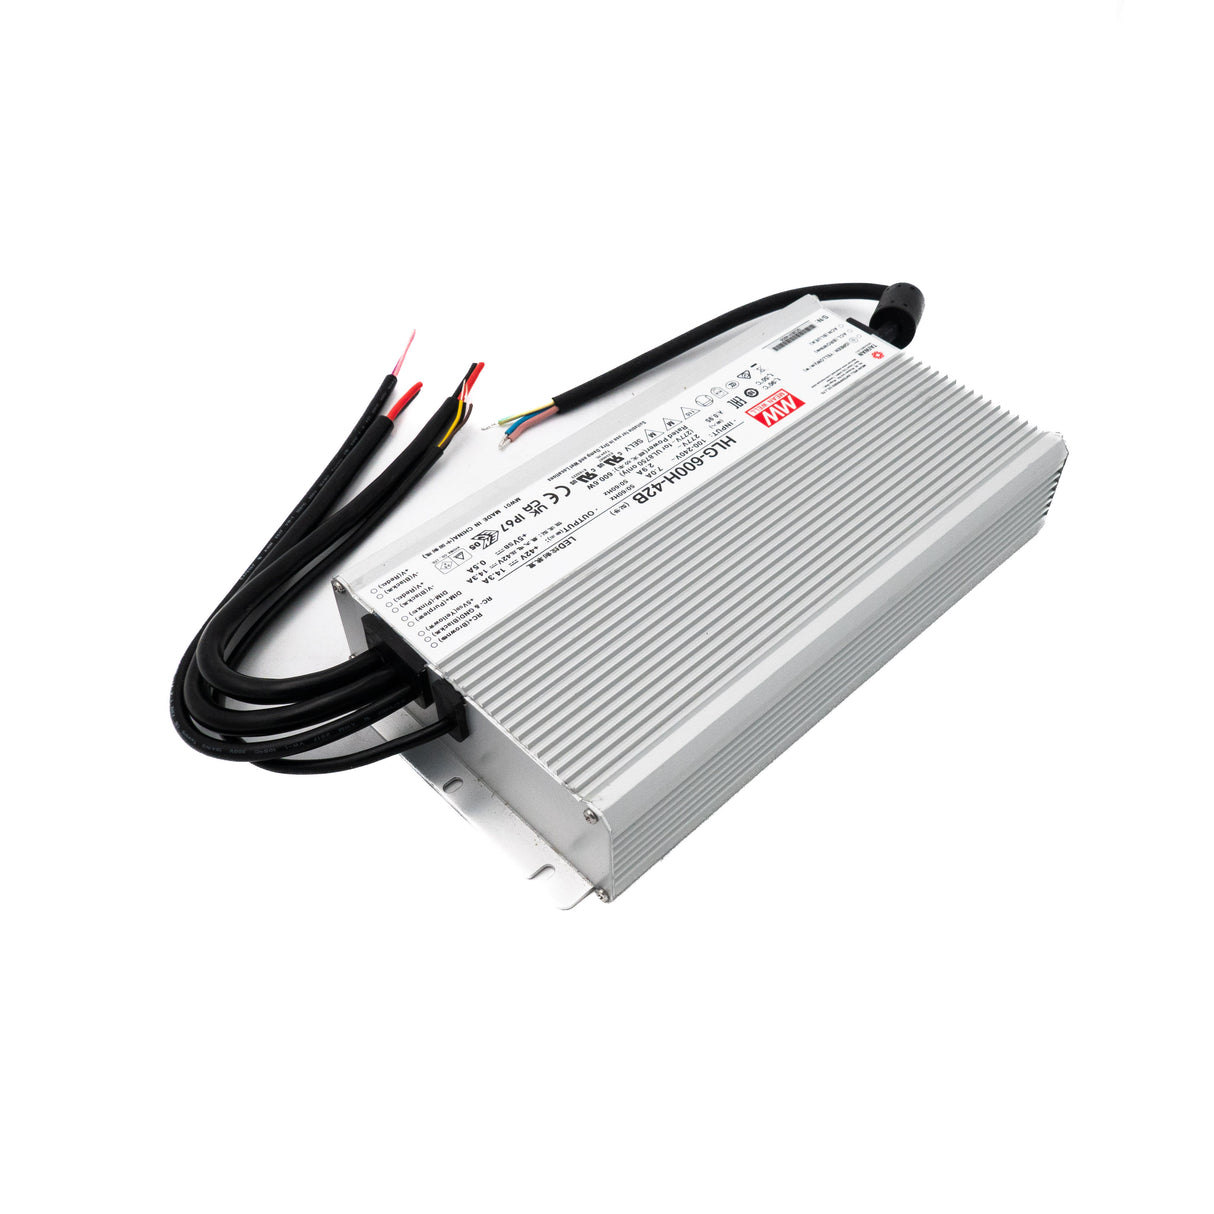 Mean Well HLG-600H-42B Power Supply 600W 42V- Dimmable - PHOTO 3